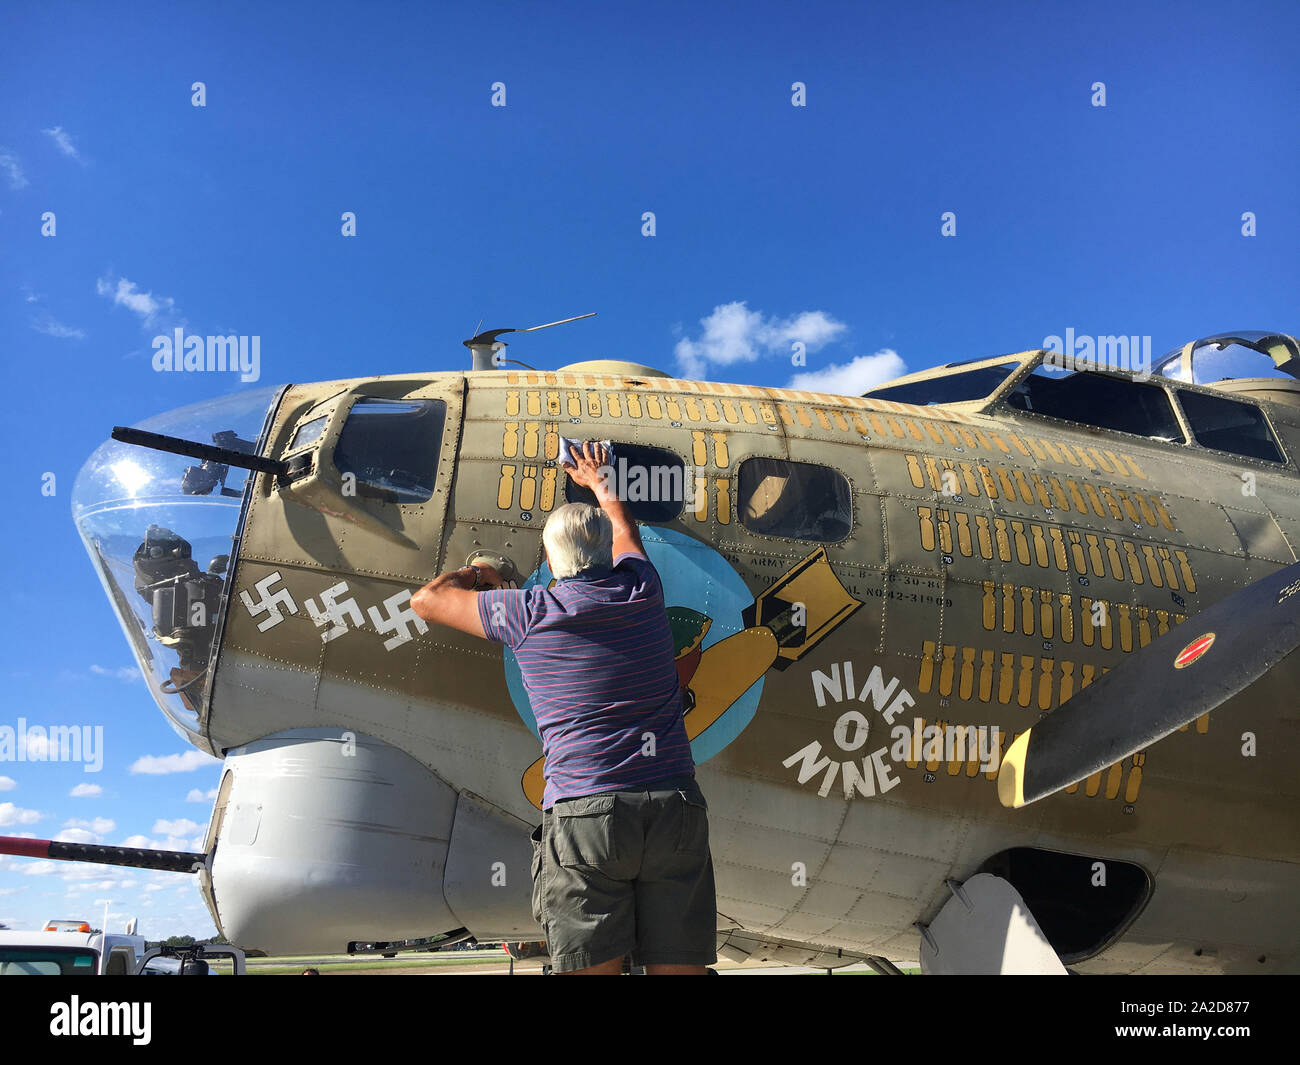 The pilot of a Boeing B-17G owned by the Collings Foundation wipes the windows before flying passengers as part of a nation-wide tour of historic aircraft at Chicago Executive Airport in Wheeling, IL on July 29, 2017. The plane was marked as the historic Nine-O-Nine of the 323rd Bomb Squadron, 91st Bomb Group that completed 140 combat missions during World War II. The plane crashed shortly after takeoff with multiple fatalities at Bradley International Airport in Windsor Locks, CT on October 2, 2019. Photo by Brian Kersey/UPI Stock Photo